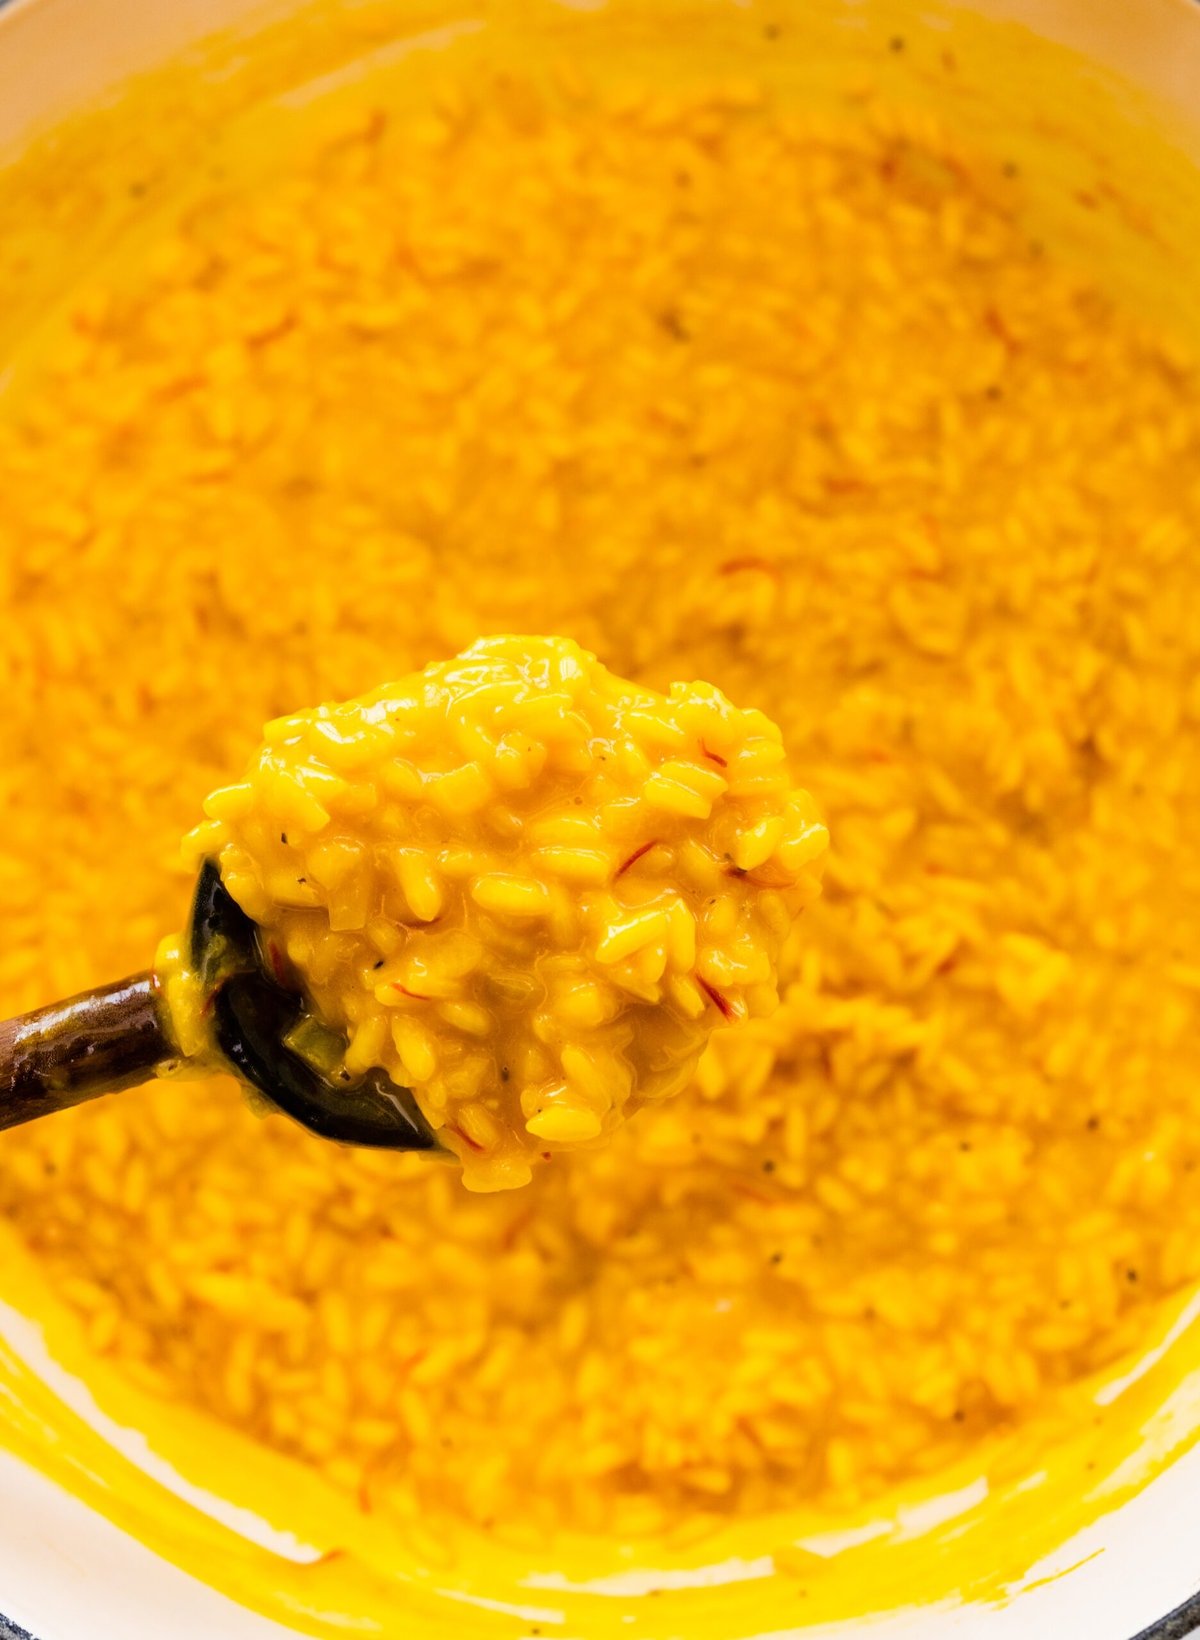 How to make risotto alla milanese step-by-step: stir in the cheese and butter to combine.